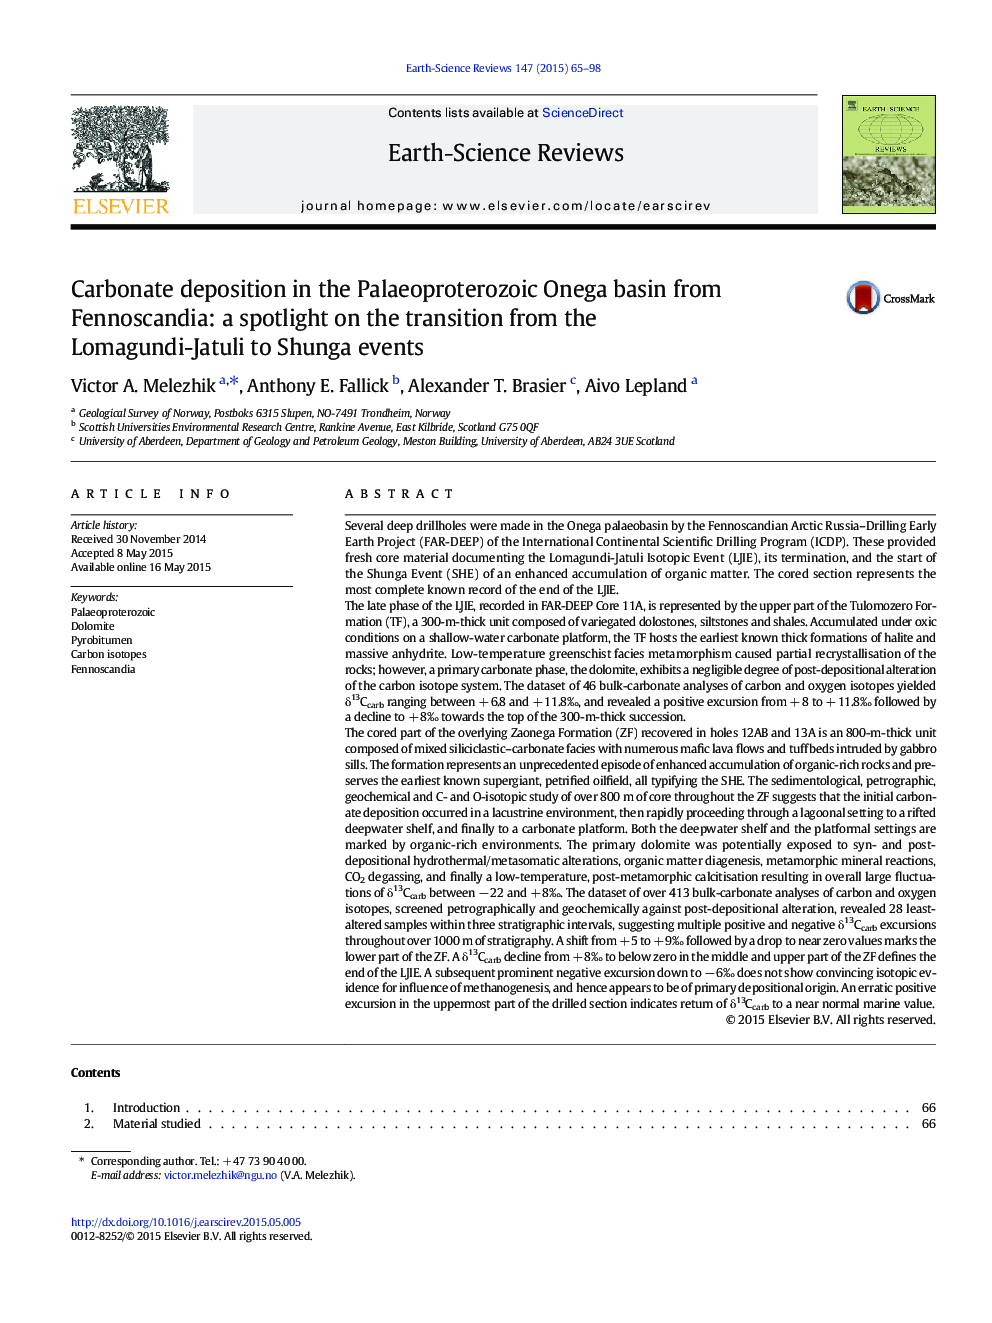 Carbonate deposition in the Palaeoproterozoic Onega basin from Fennoscandia: a spotlight on the transition from the Lomagundi-Jatuli to Shunga events